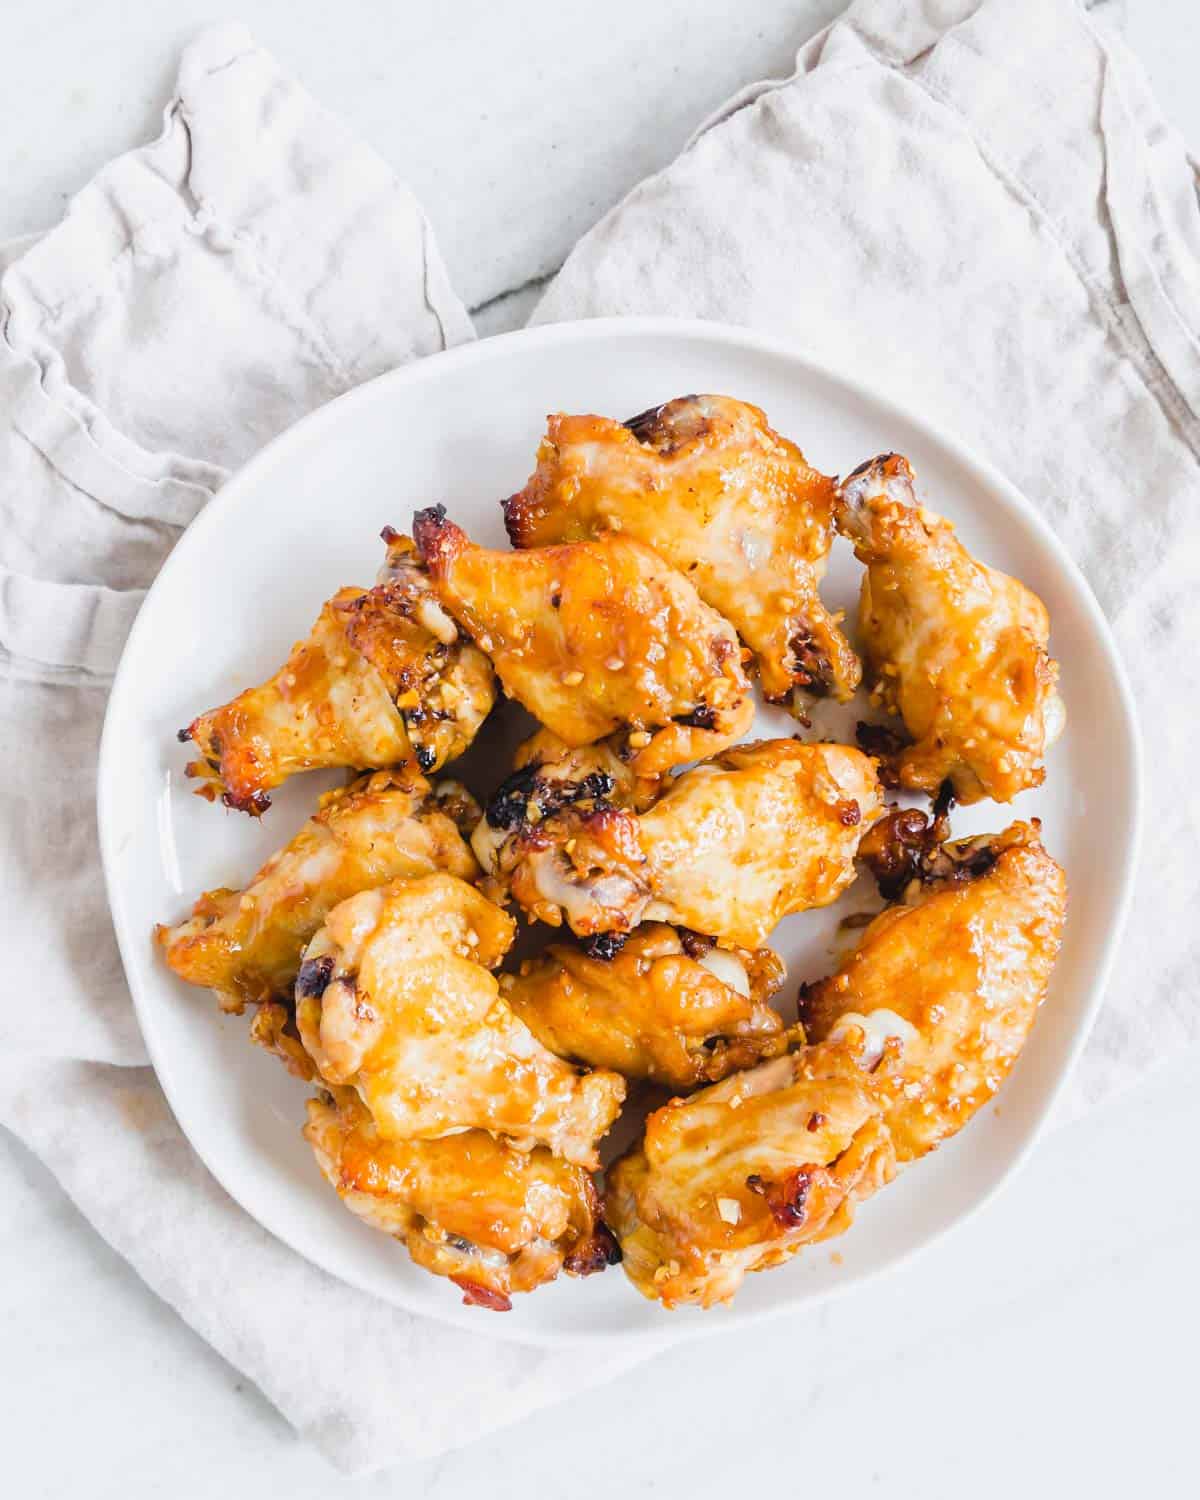 Easy marinated baked chicken wings on a plate with a neutral colored kitchen towel.